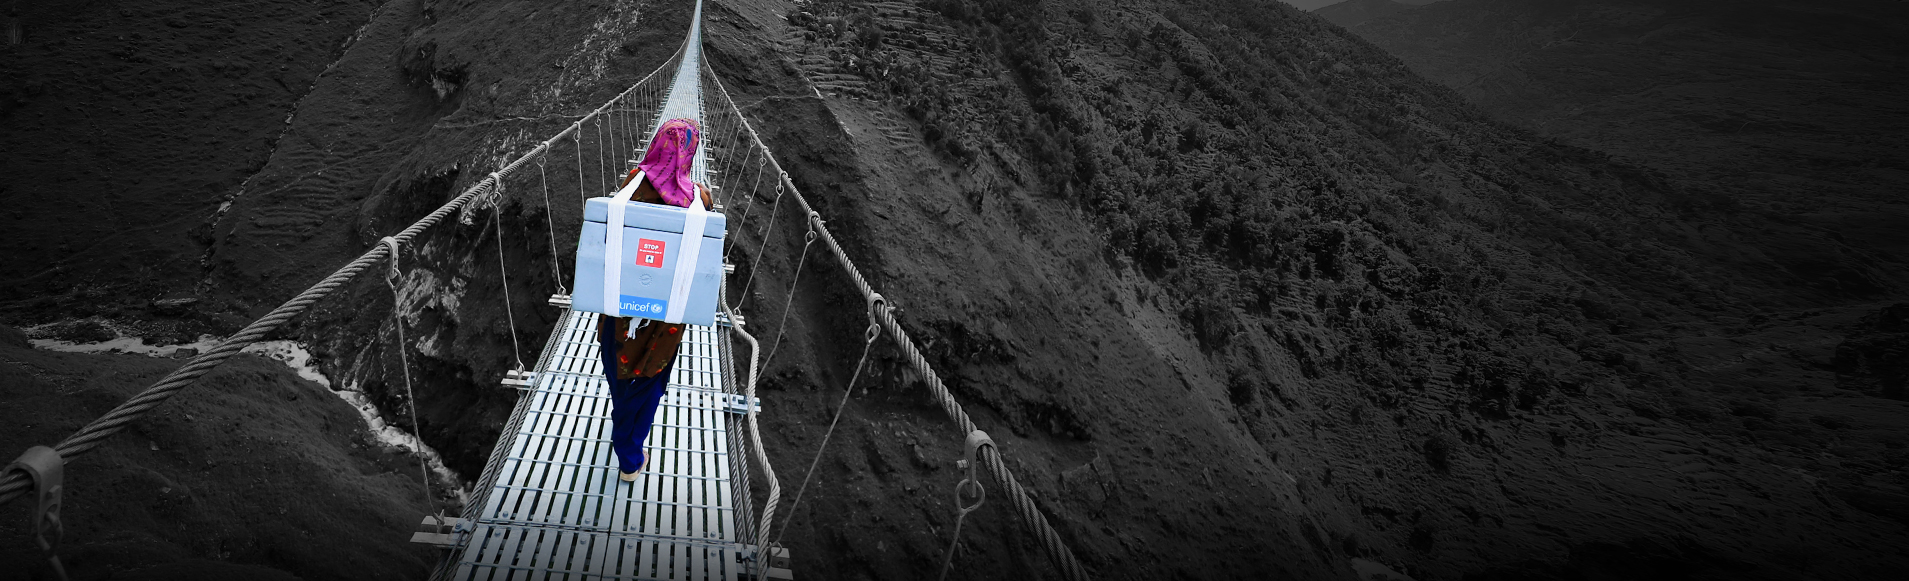 A woman carrying a UNICEF container on her back walks across a rope bridge between mountains